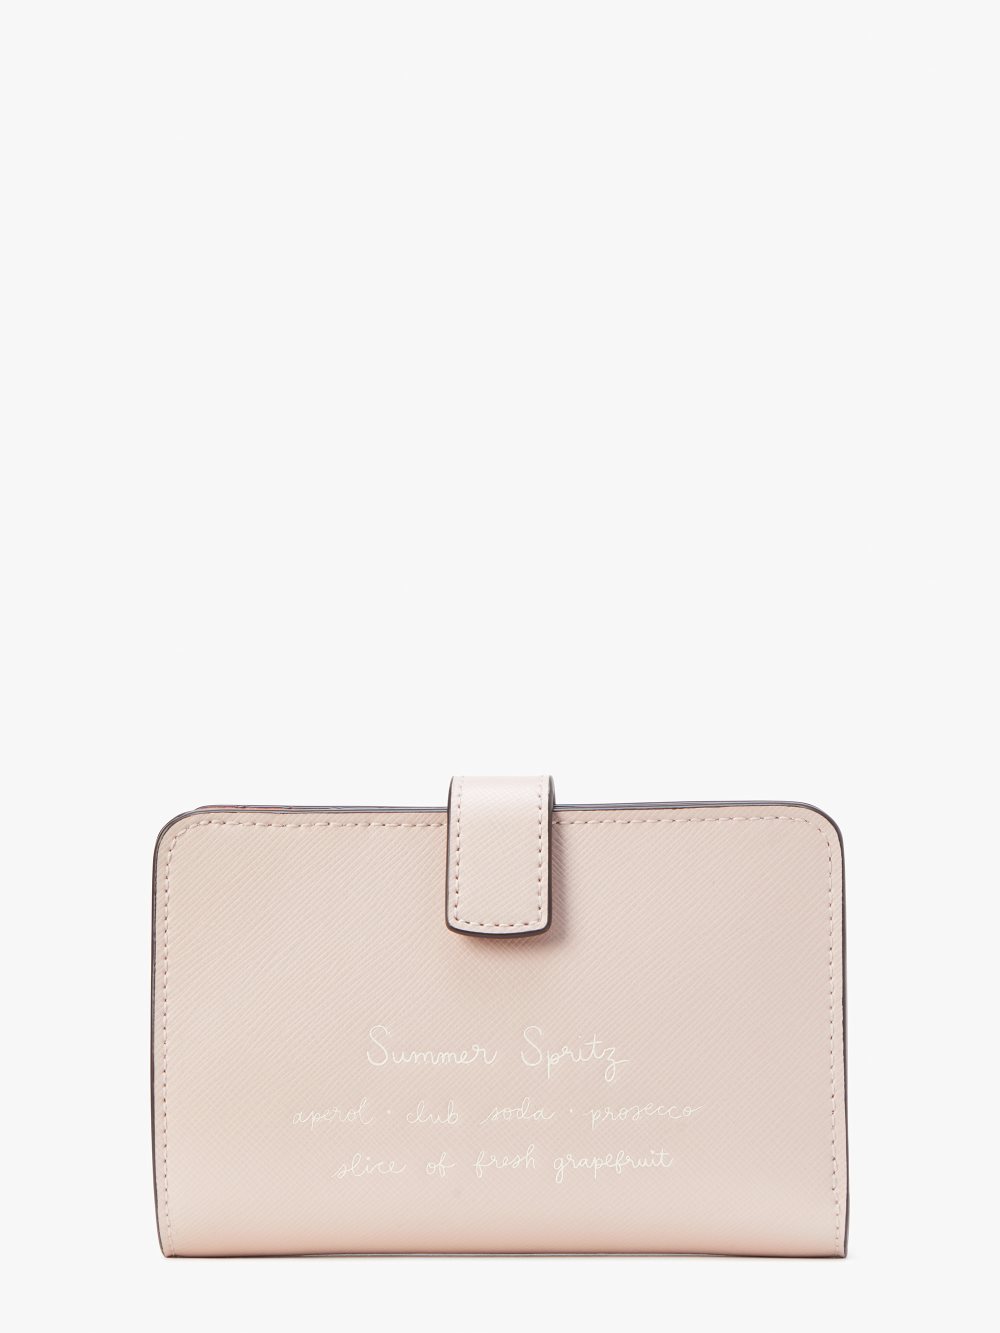 Women's pale dogwood tini embellished compact wallet | Kate Spade